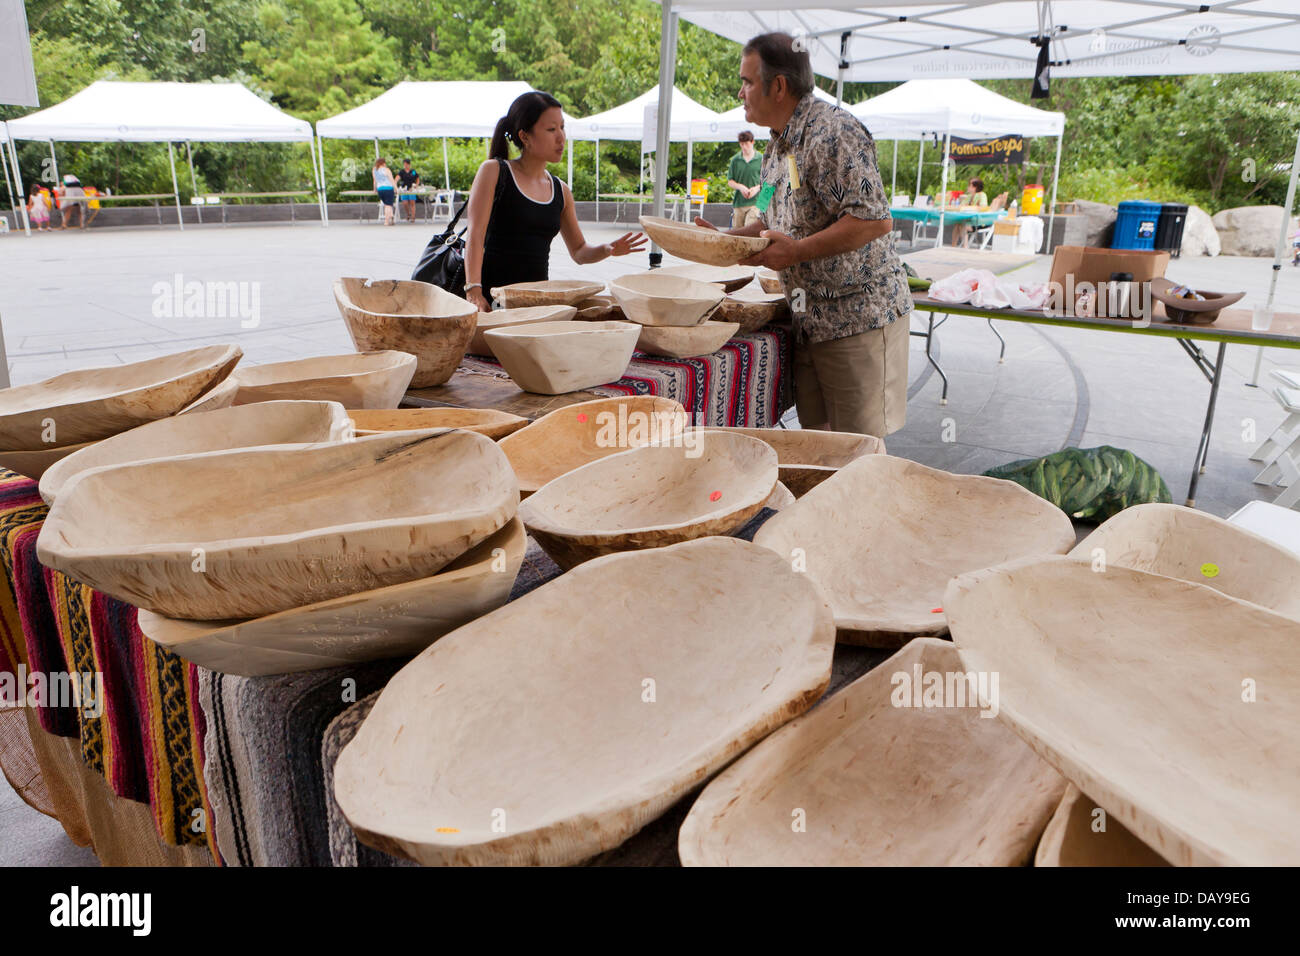 Man selling hand carved wooden bowls Stock Photo